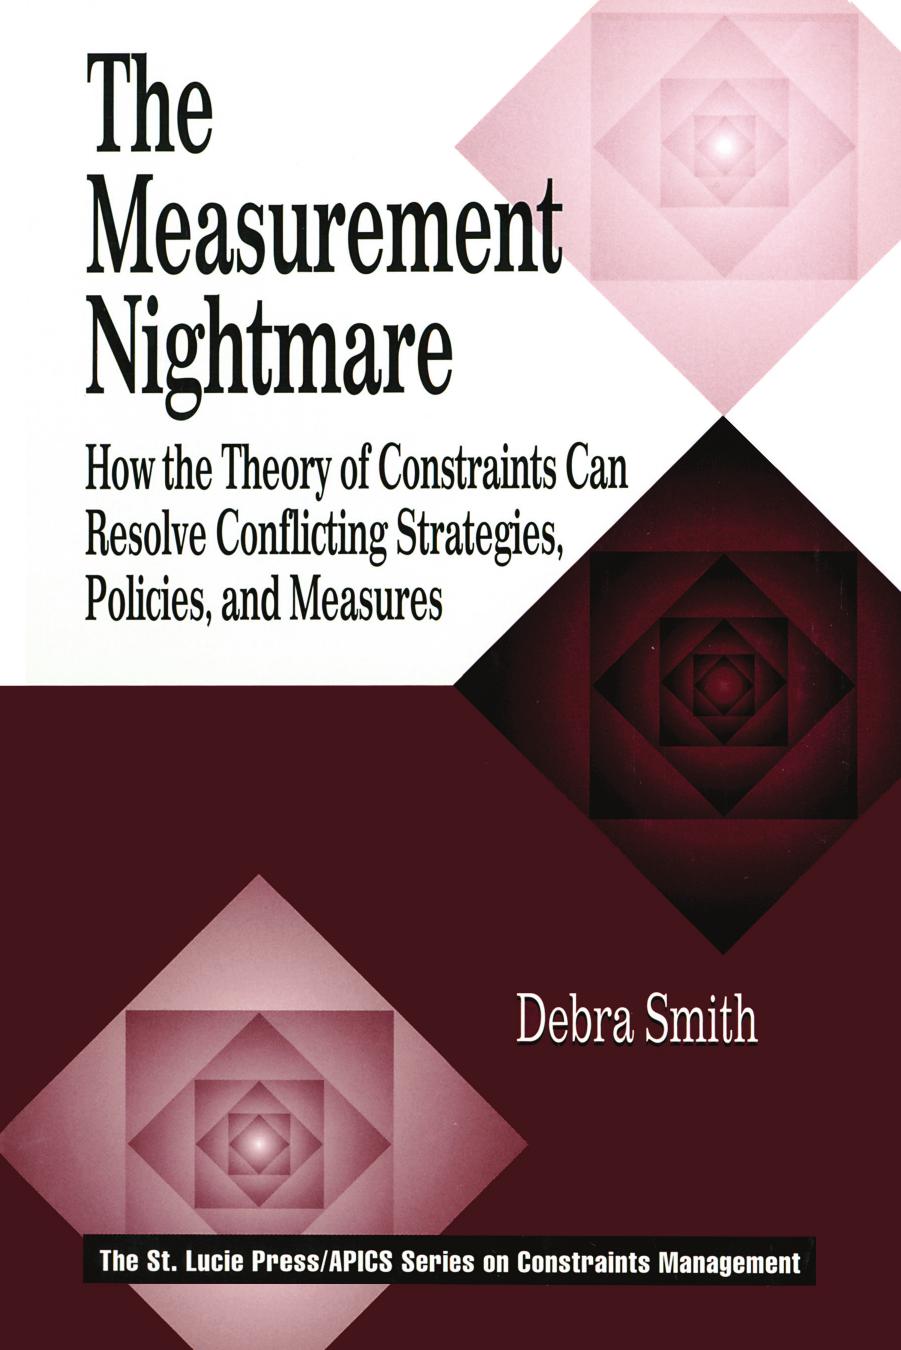 The Measurement Nightmare: How the Theory of Contraints Can Resolve Conflicting Strategies, Policies, and Measures